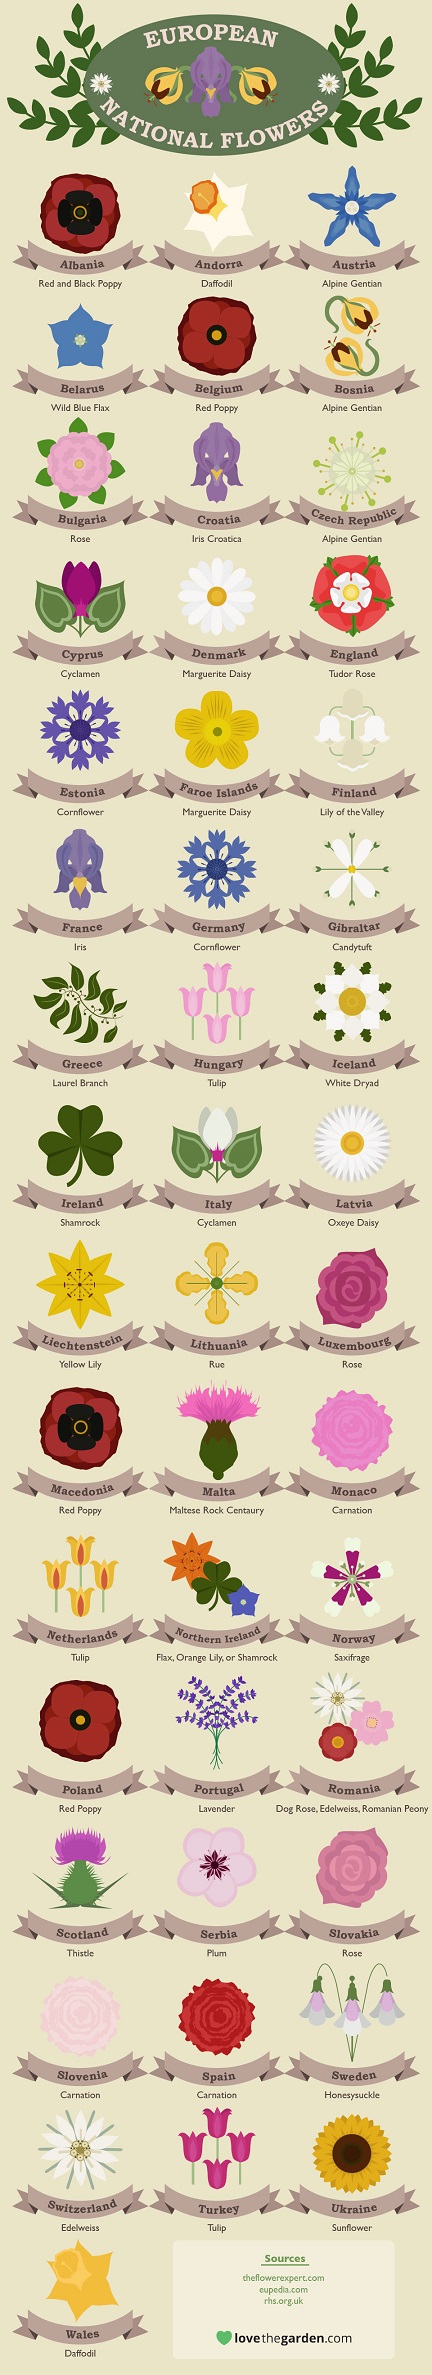 Nations-favourite-flowers-infographic reduced